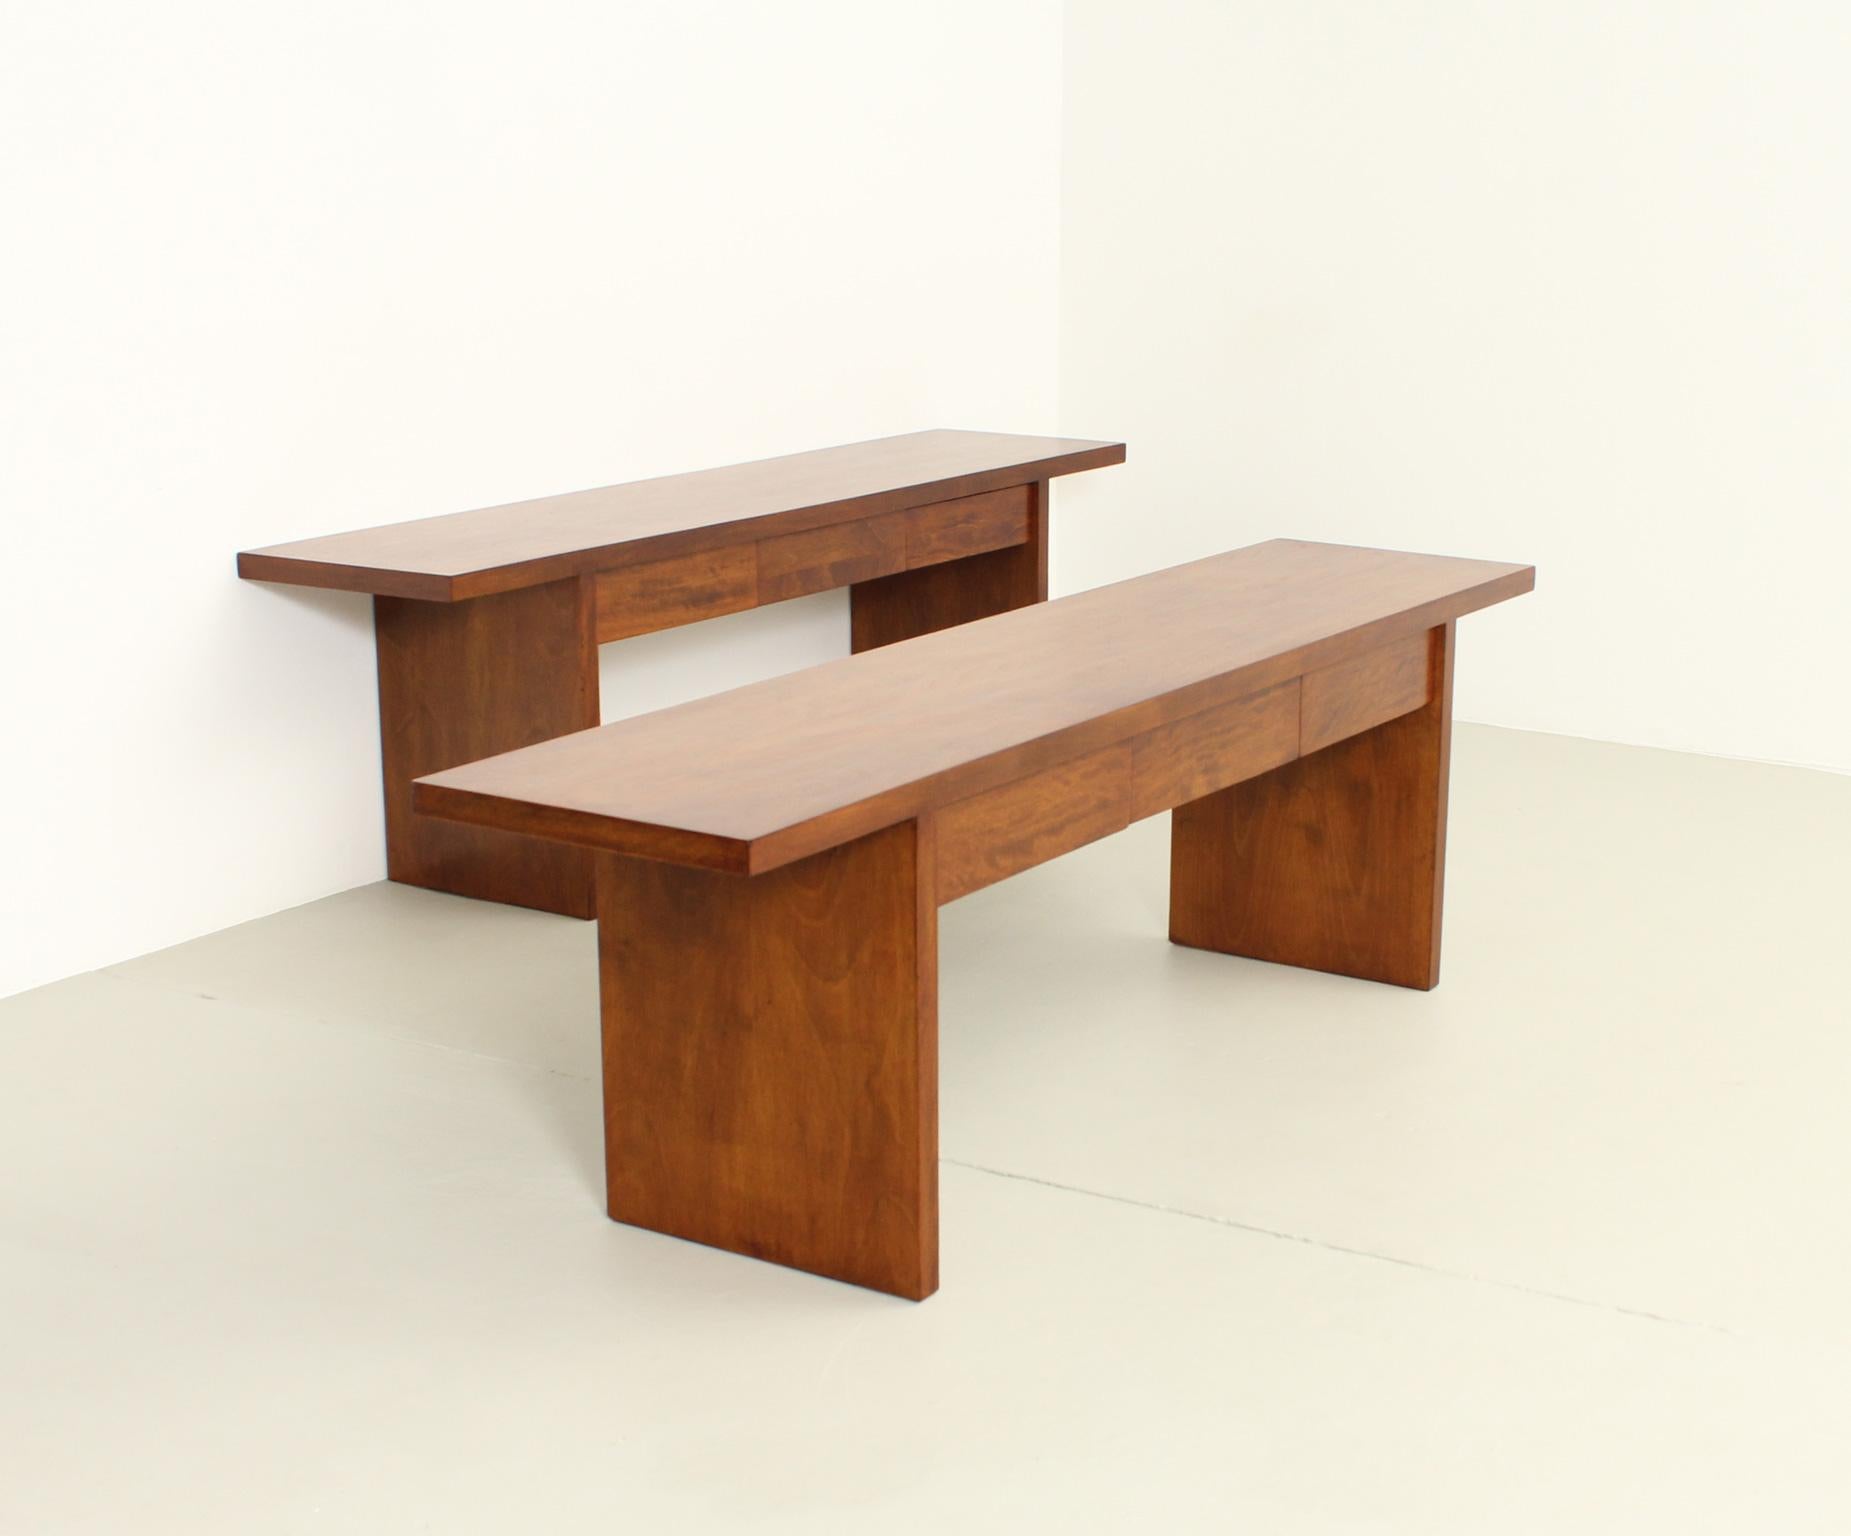 Low console designed by Jordi Vilanova in 1960s, Spain. Walnut wood with three drawers. Design with simple lines very common in the work of Jordi Vilanova.
One unit available